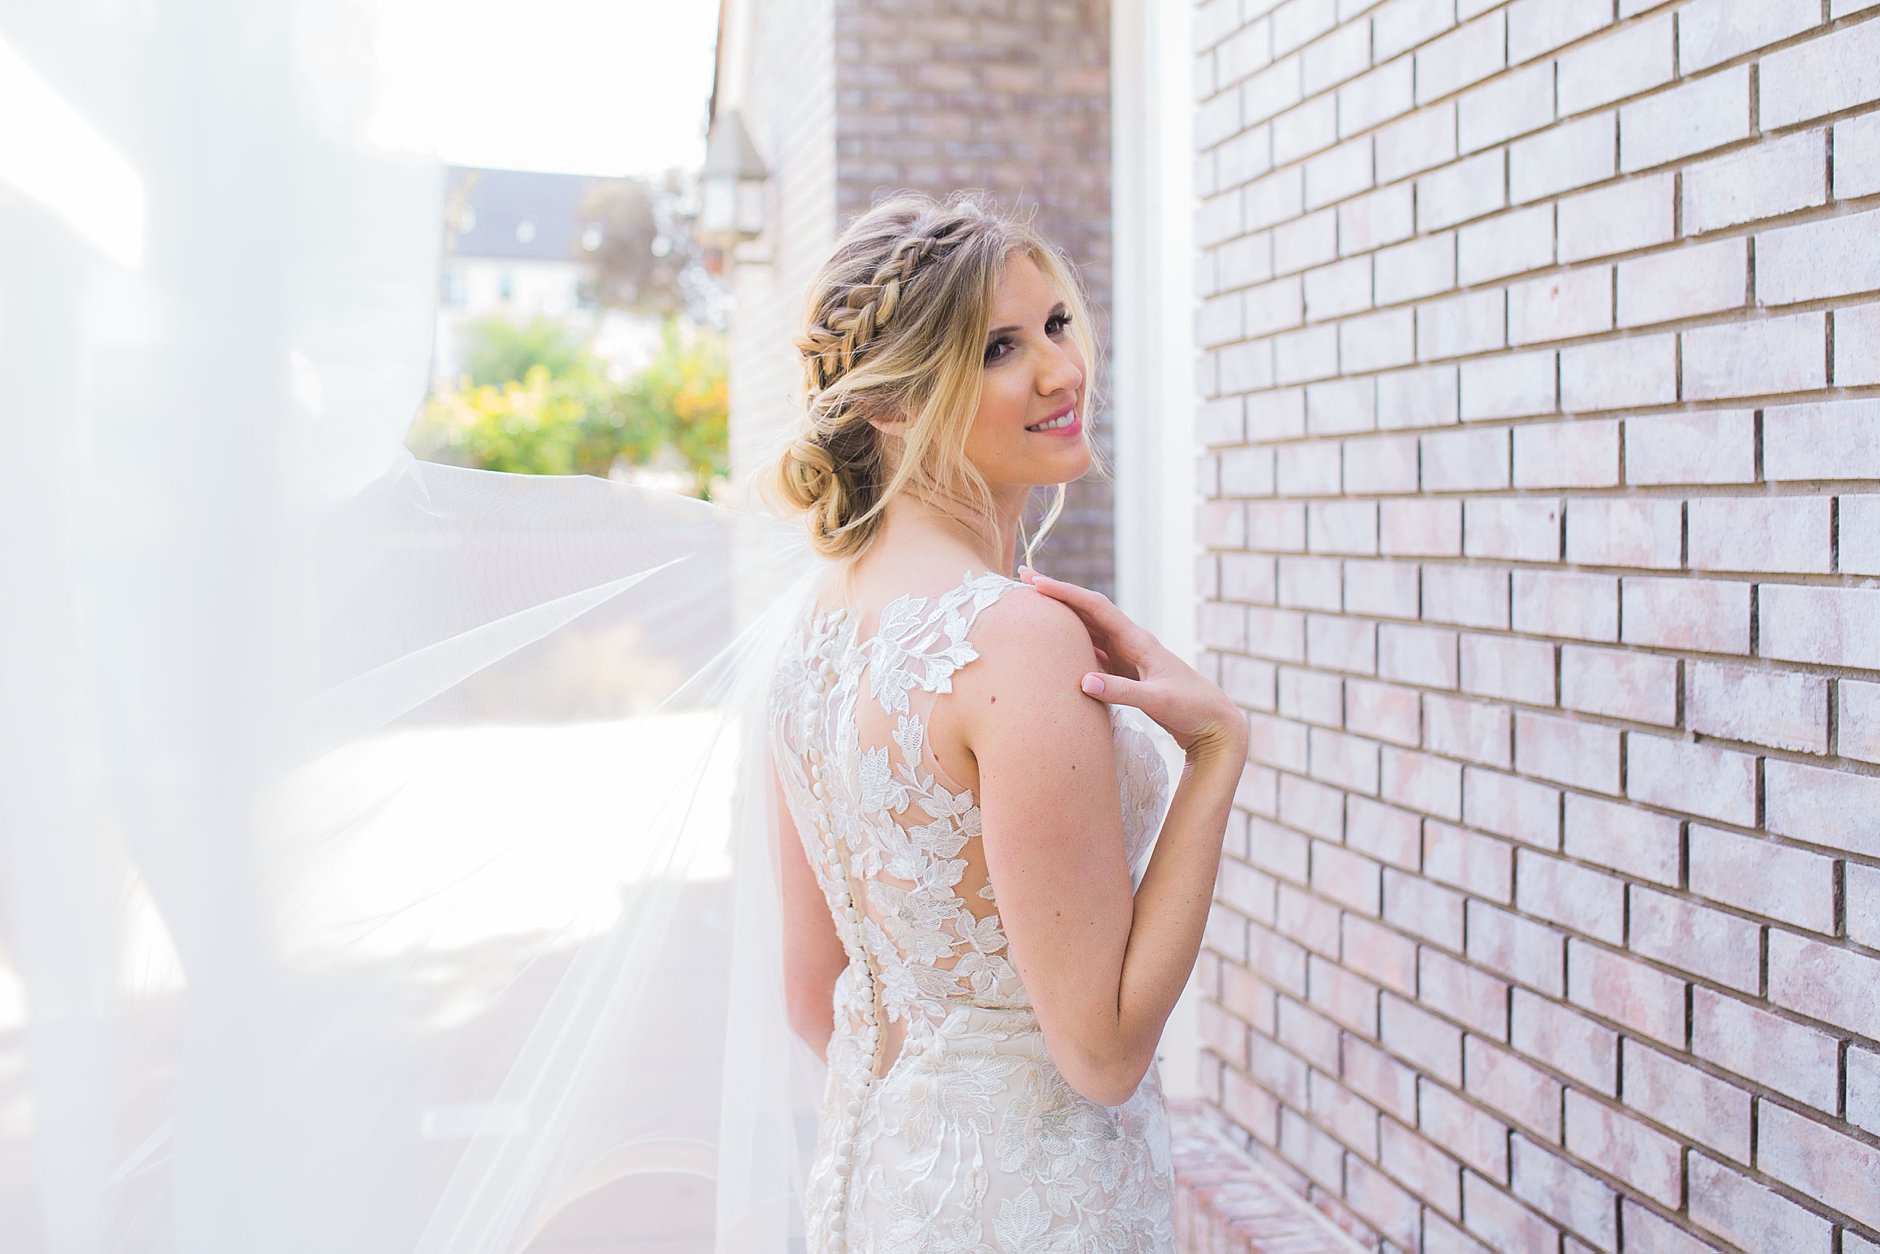 L'Auberge Del Mar Bride portrait posing by the brick wall. Gorgeous lacy dress and braided hair.